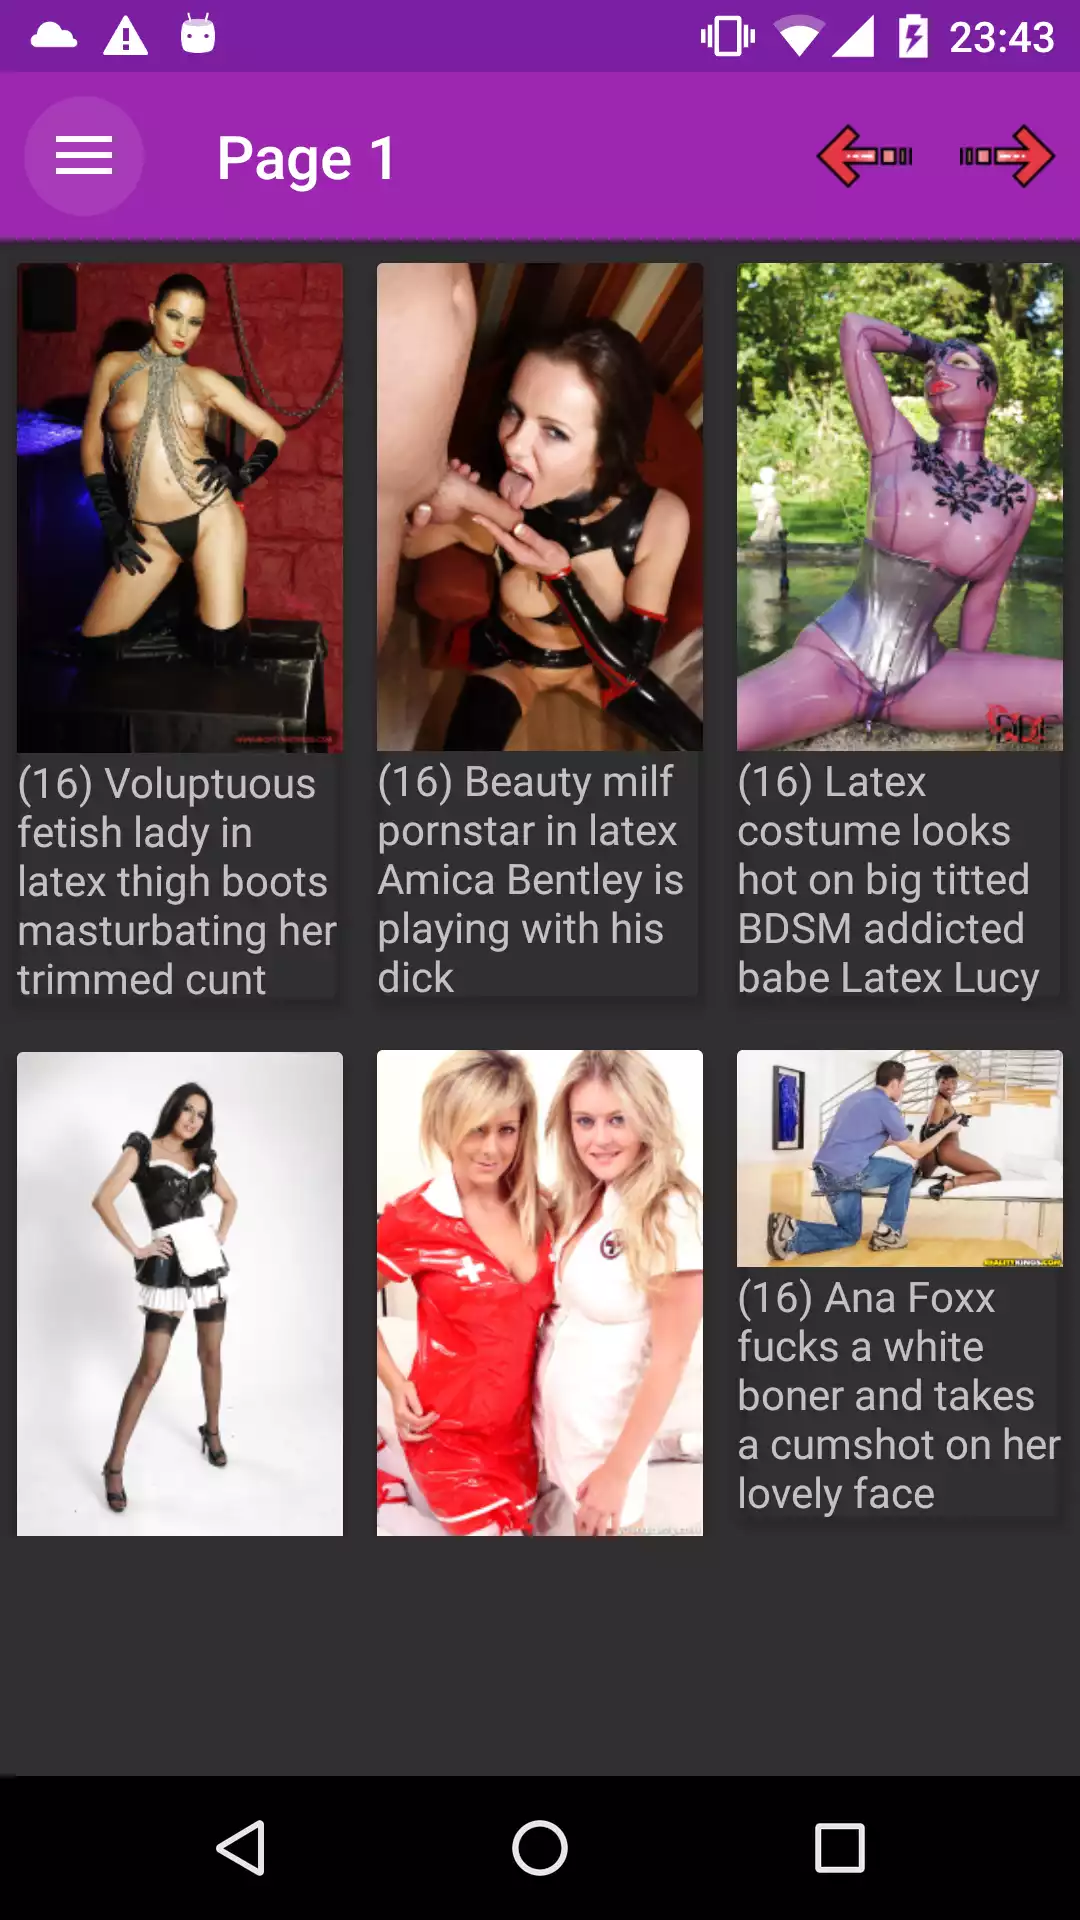 Latex galleries pic,hentie,new,hentai,sexygalleries,blowbang,caprice,packs,pics,galleries,apk,futanari,app,titty,adult,daily,porn,photos,sexy